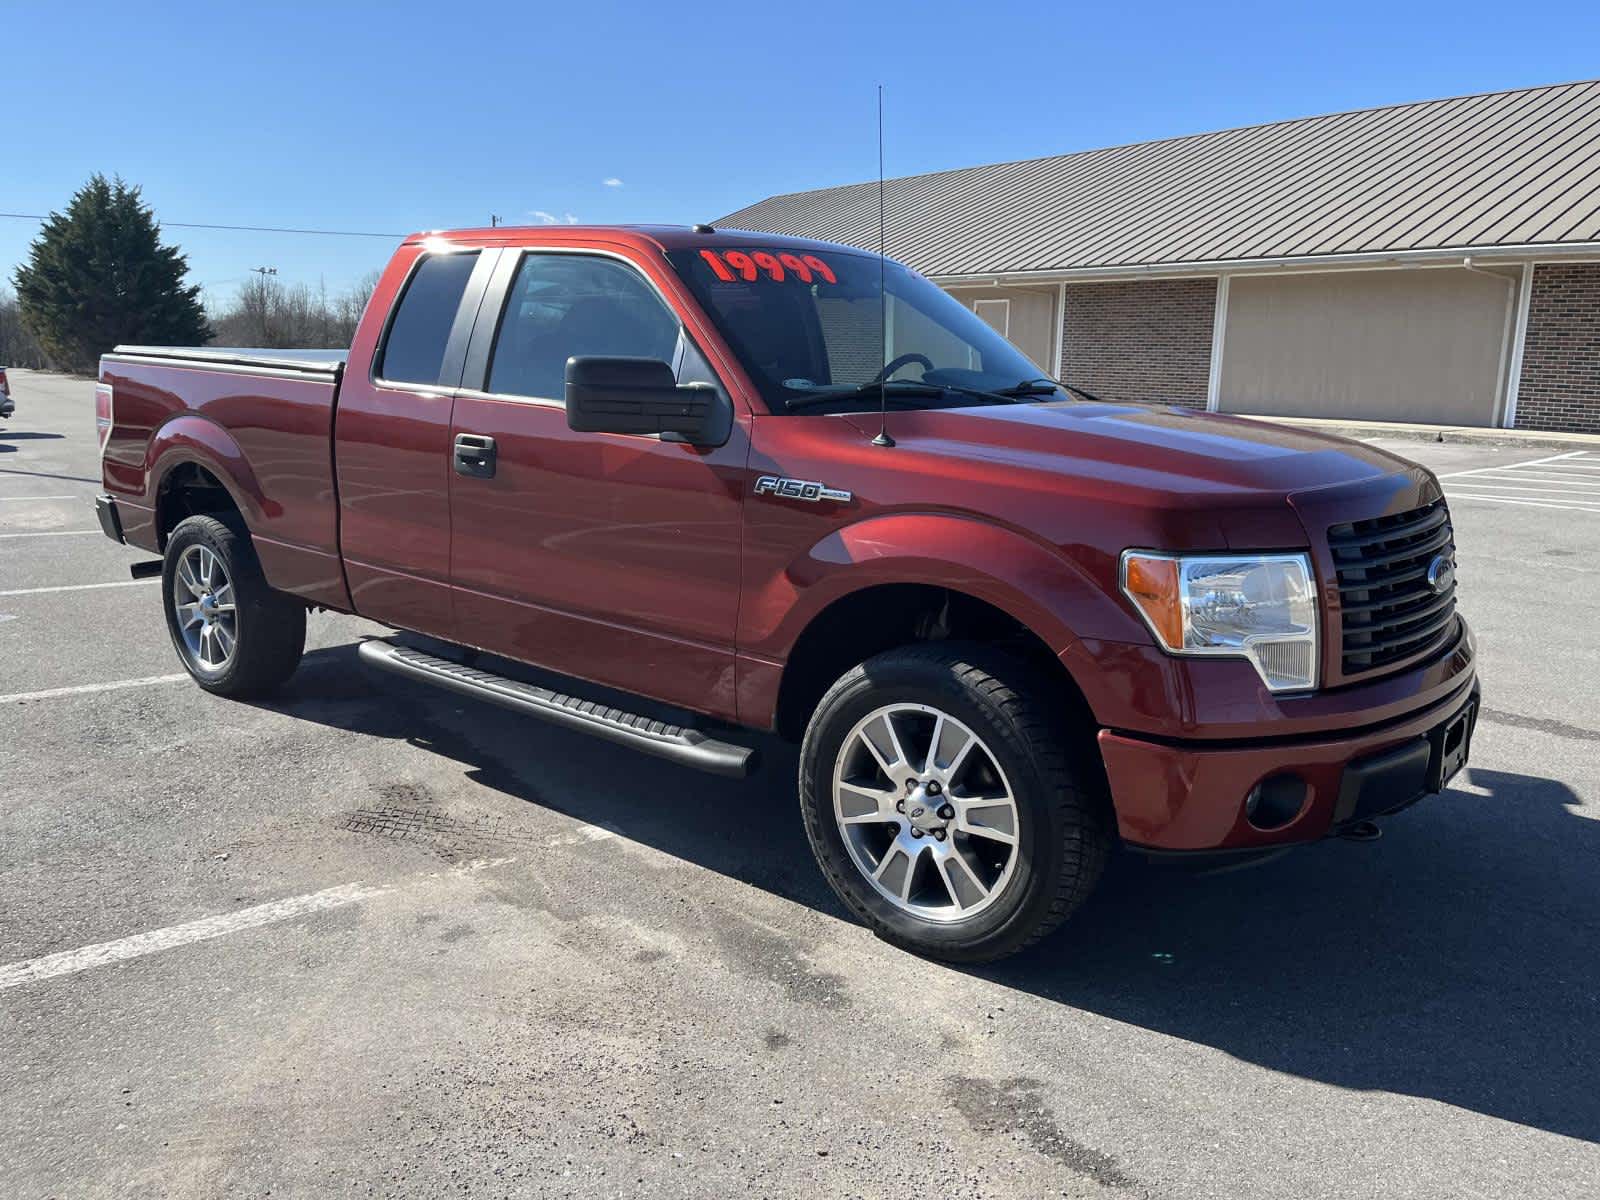 Used 2014 Ford F-150 For Sale at Grayson Hyundai | VIN